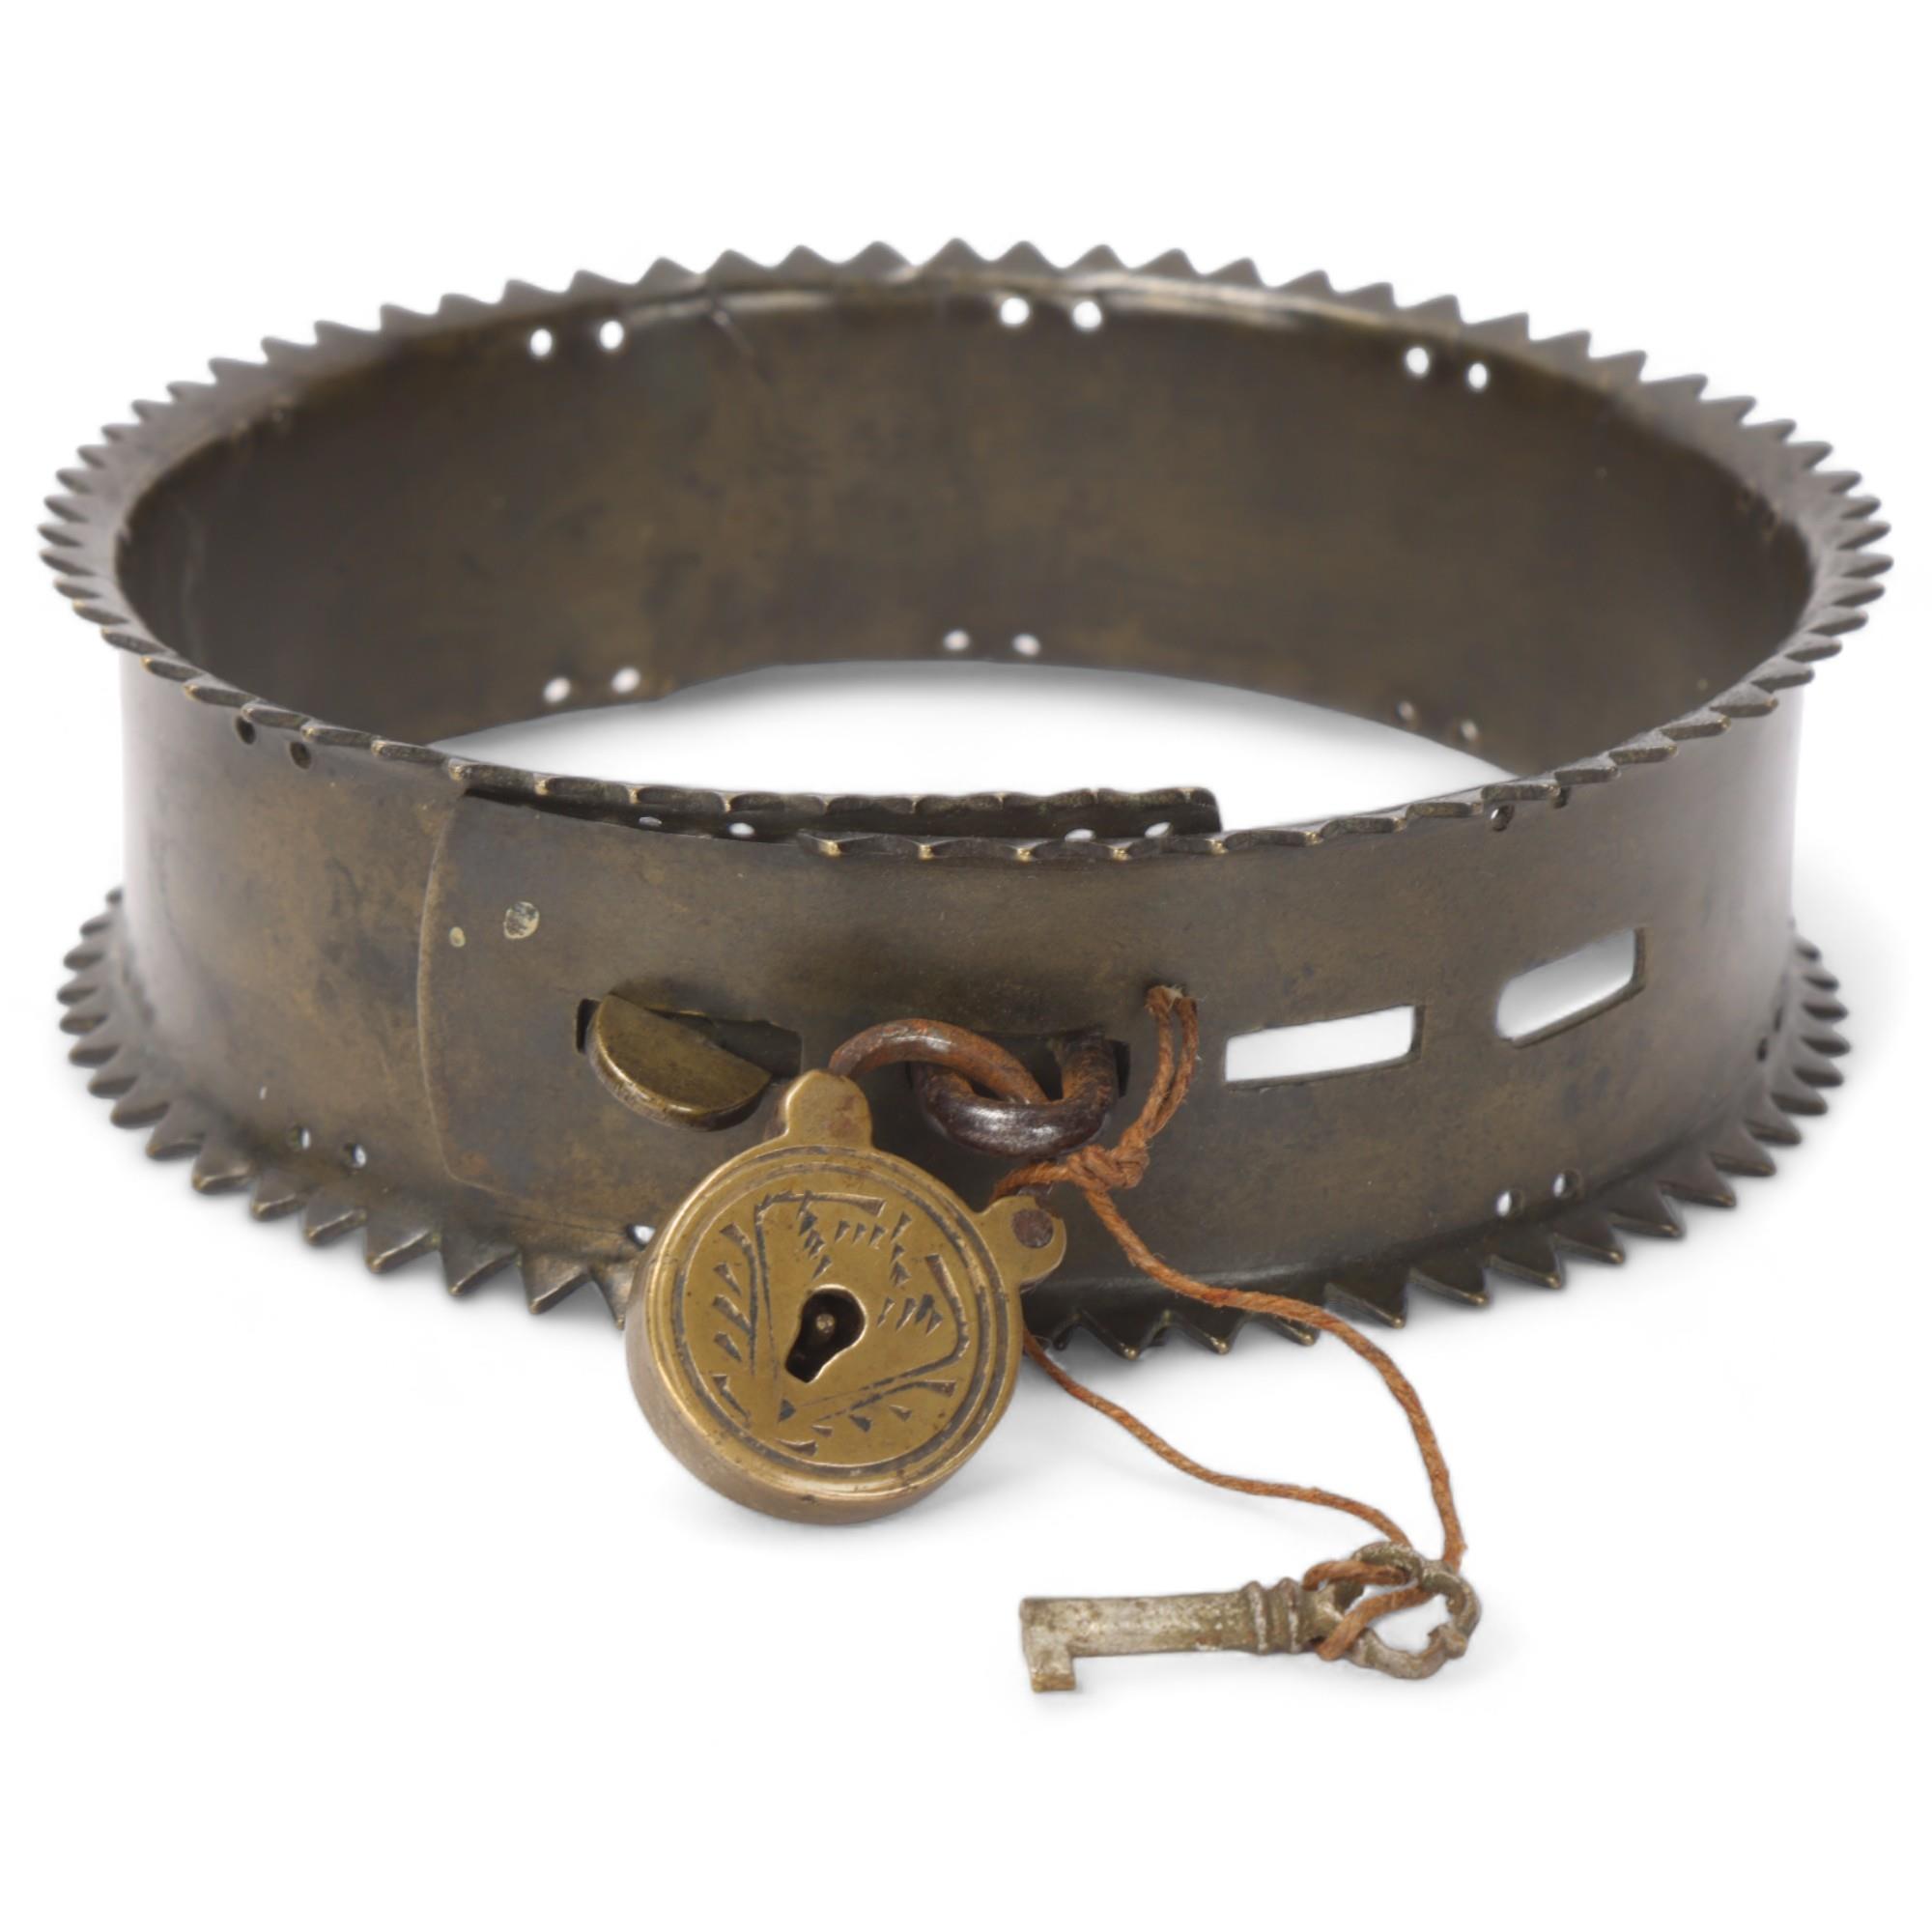 Antique brass dog collar with serrated edge, engraved Howard Esq Lower Close Norwich, complete